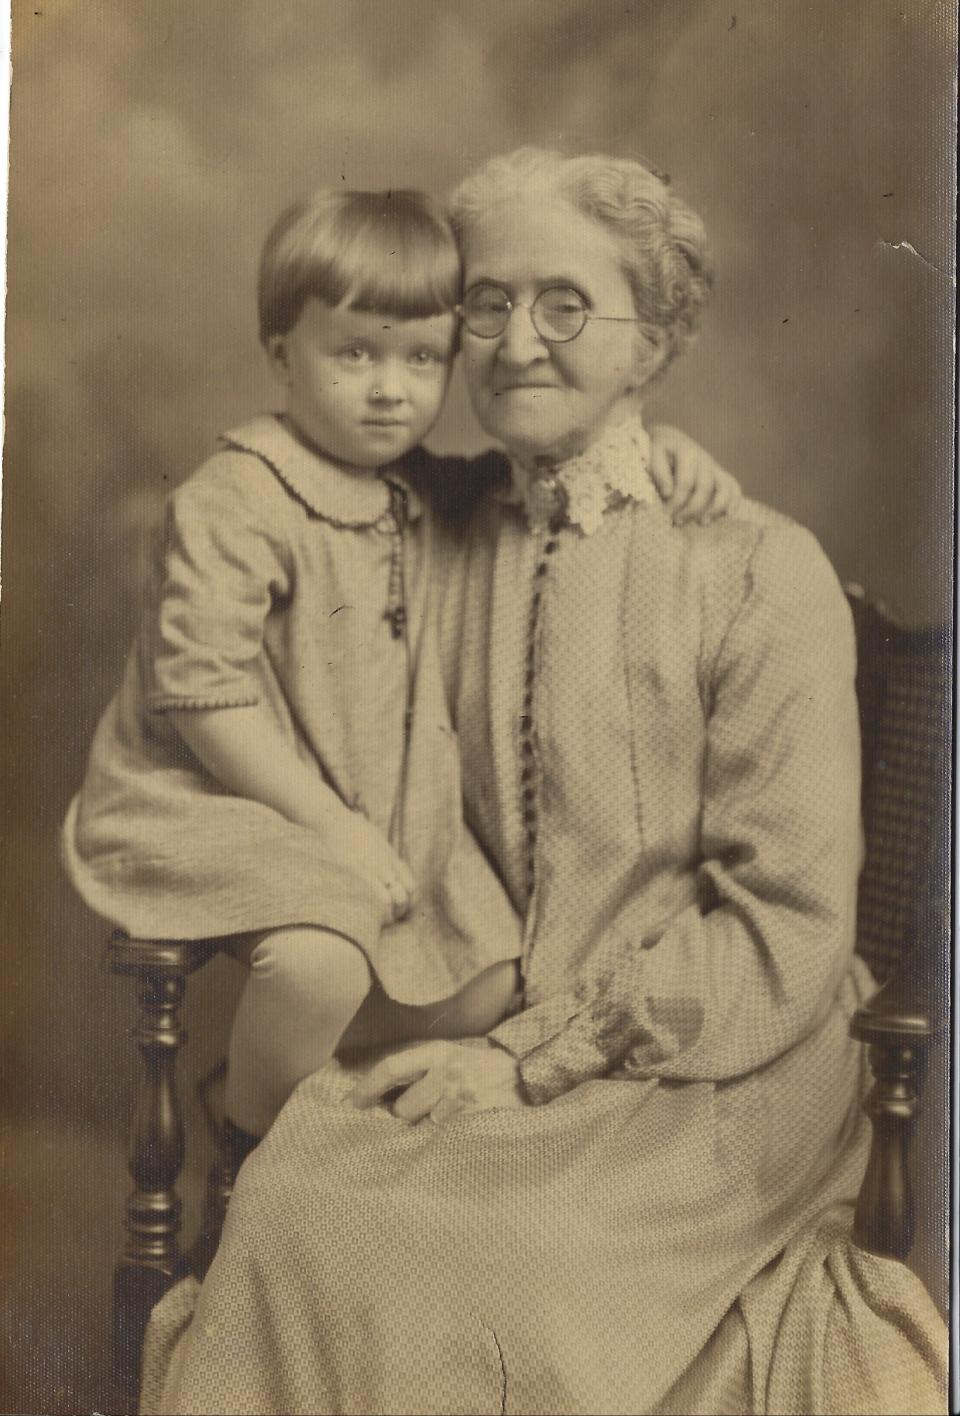 Mary Ann Kennon Buchanon and unknown child, of Belmont, OH